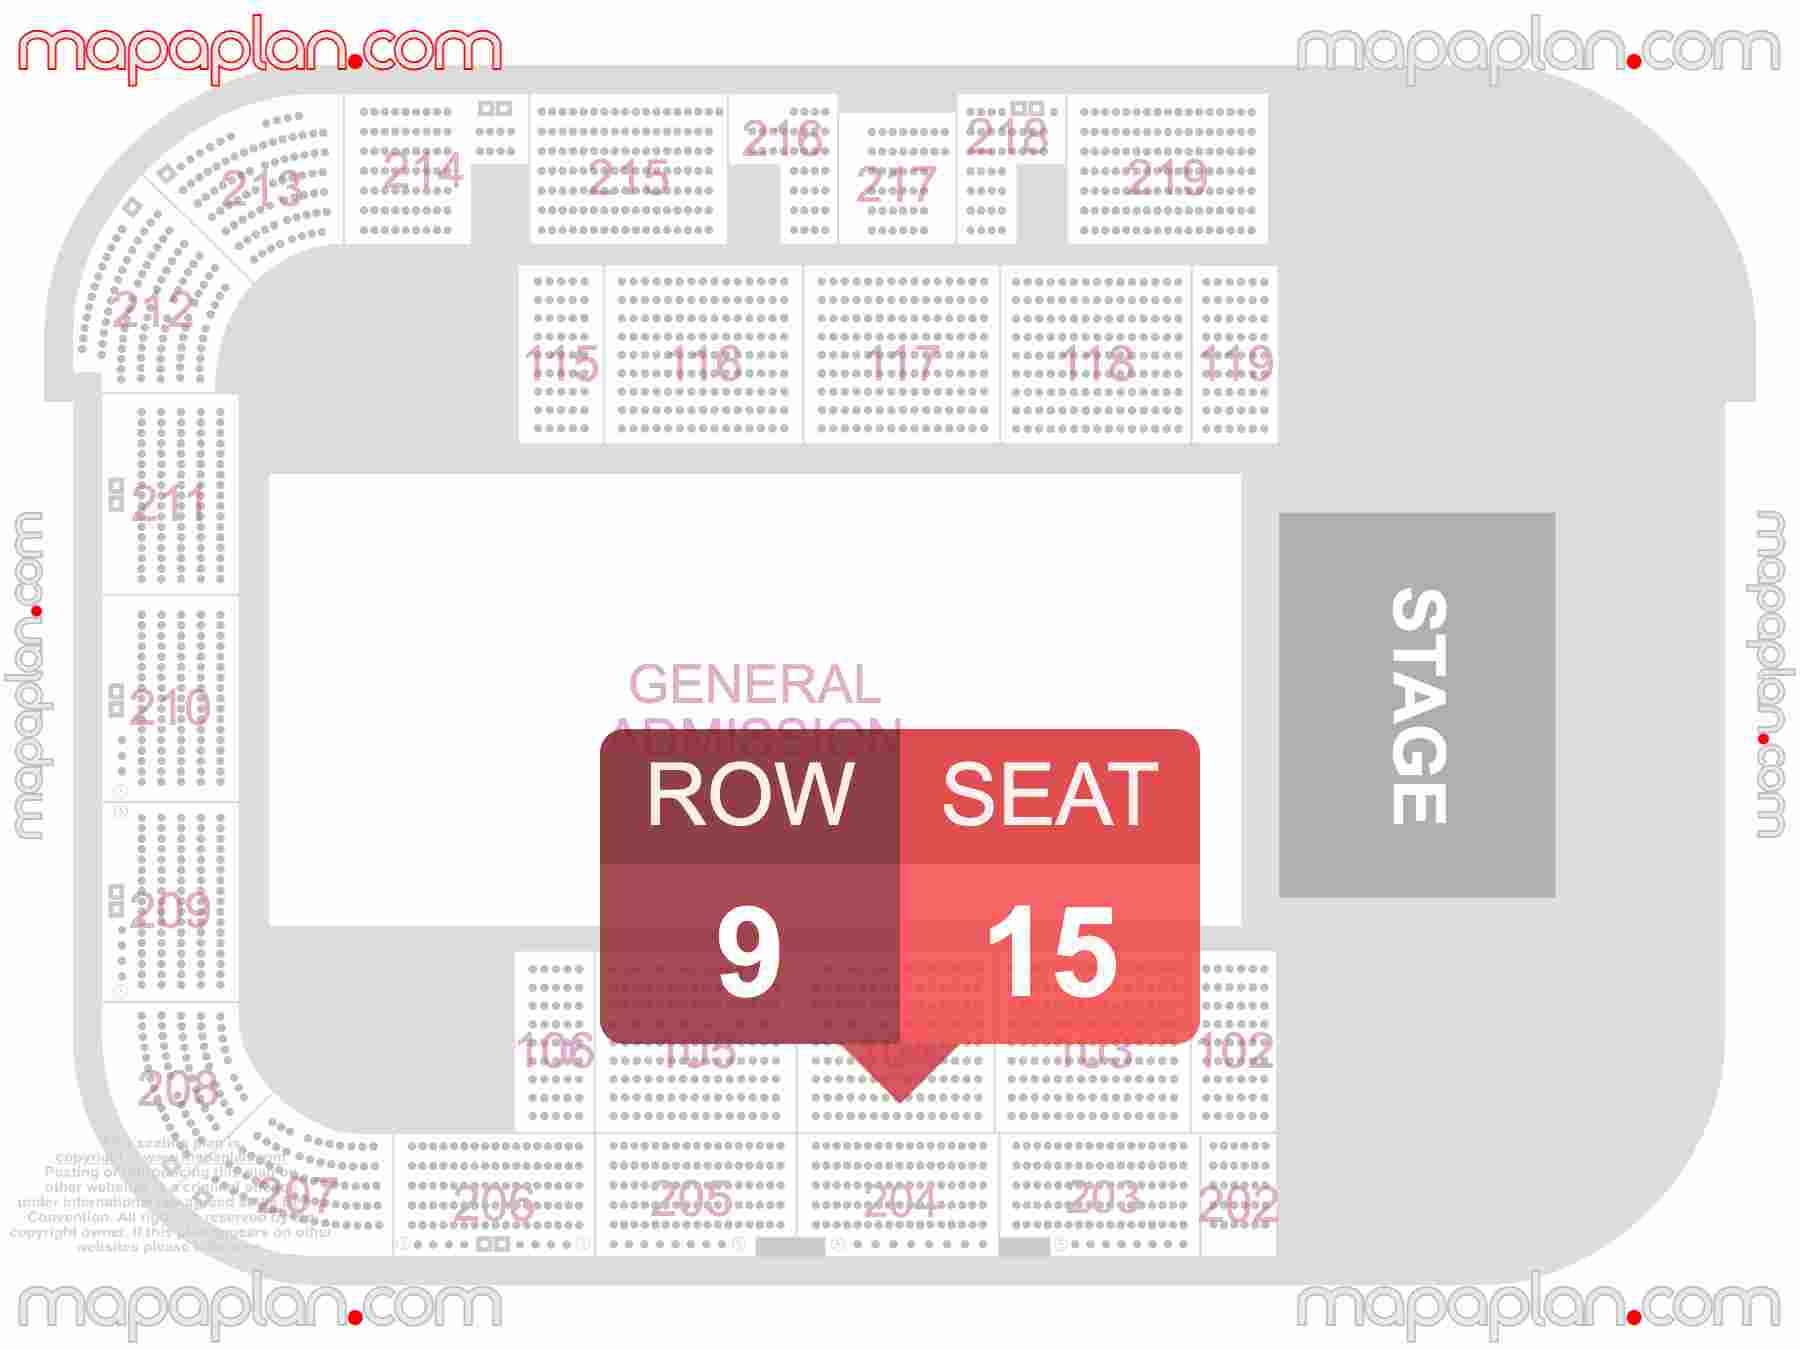 Perth HBF Stadium Superdrome seating map Concert with extented floor general admission area inside capacity view arrangement plan - Interactive virtual 3d best seats & rows detailed stadium image configuration layout